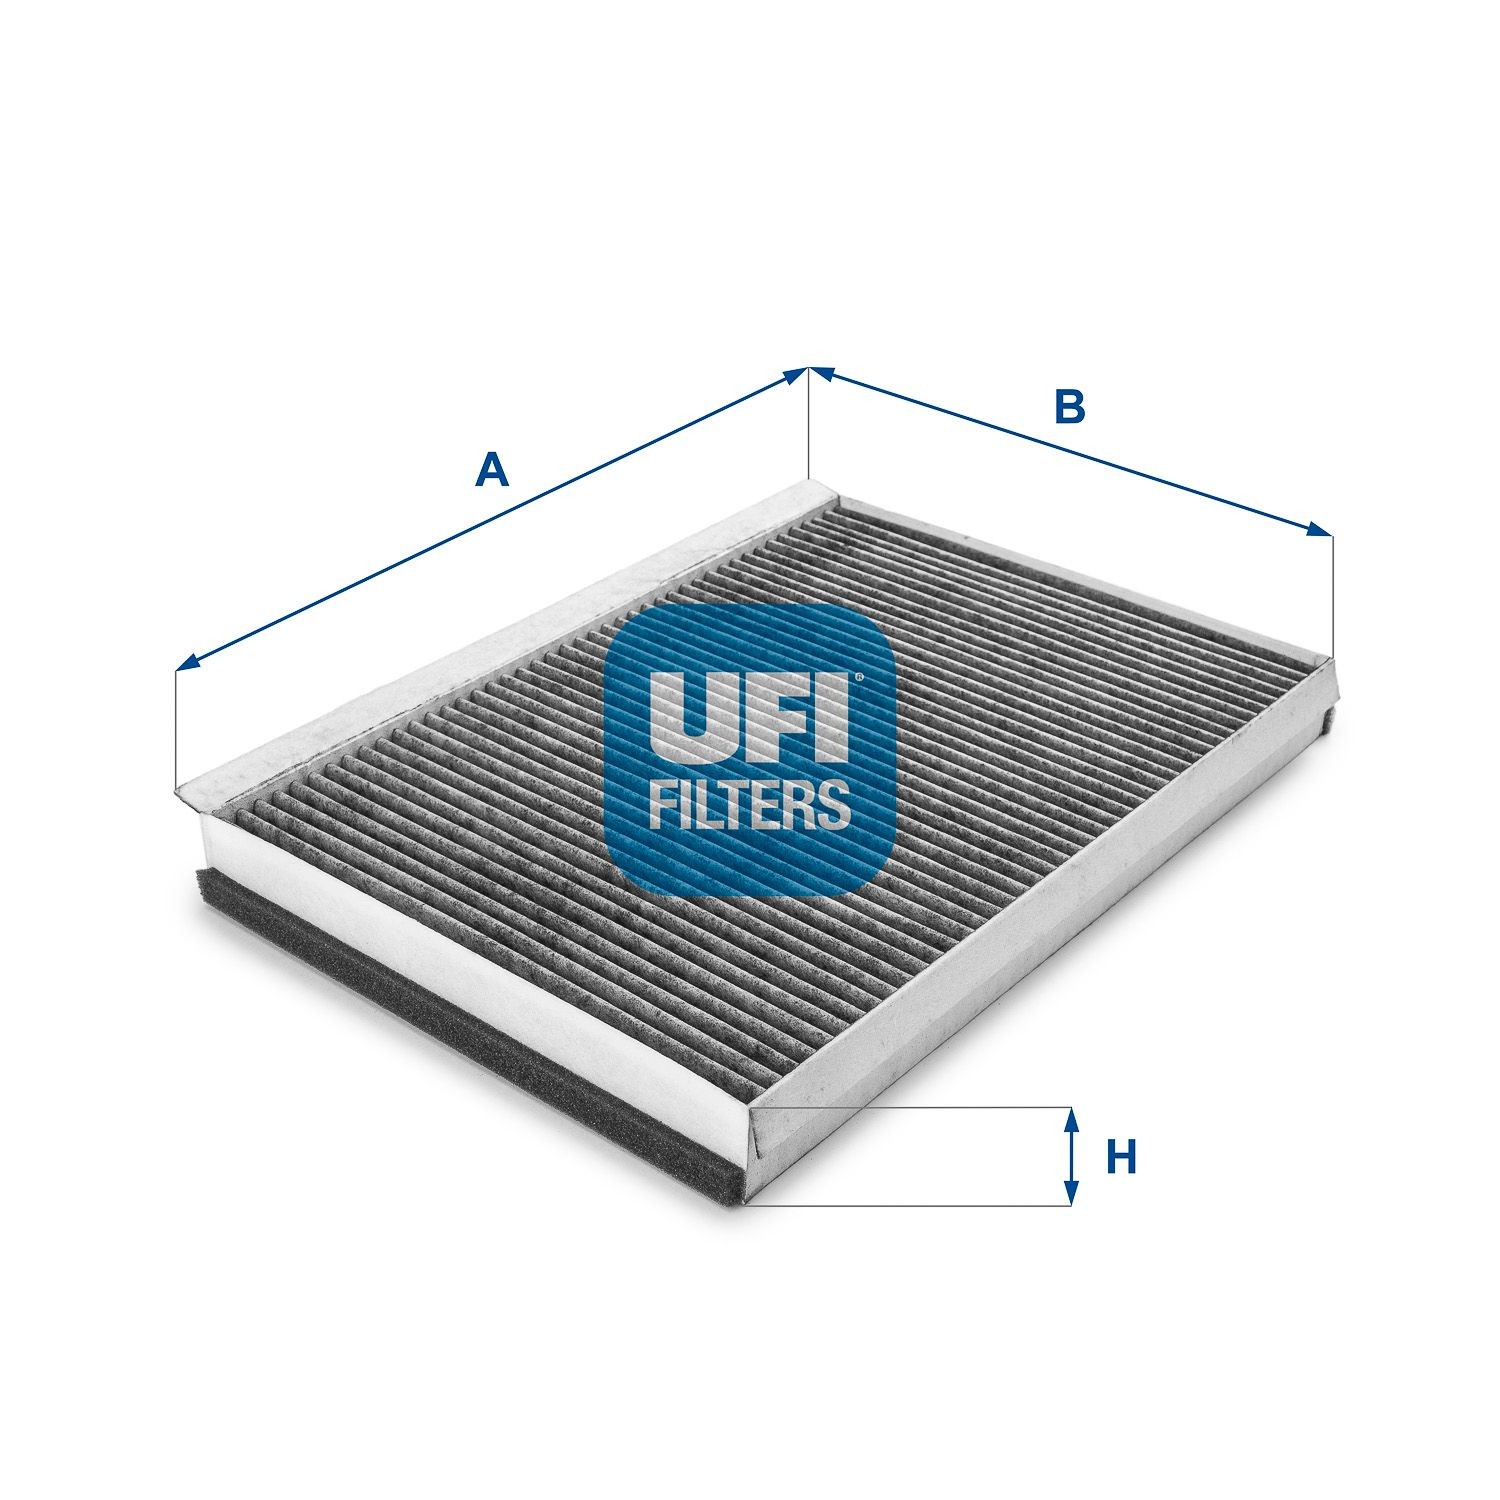 UFI 54.161.00 Pollen filter Activated Carbon Filter, 365 mm x 246 mm x 35 mm